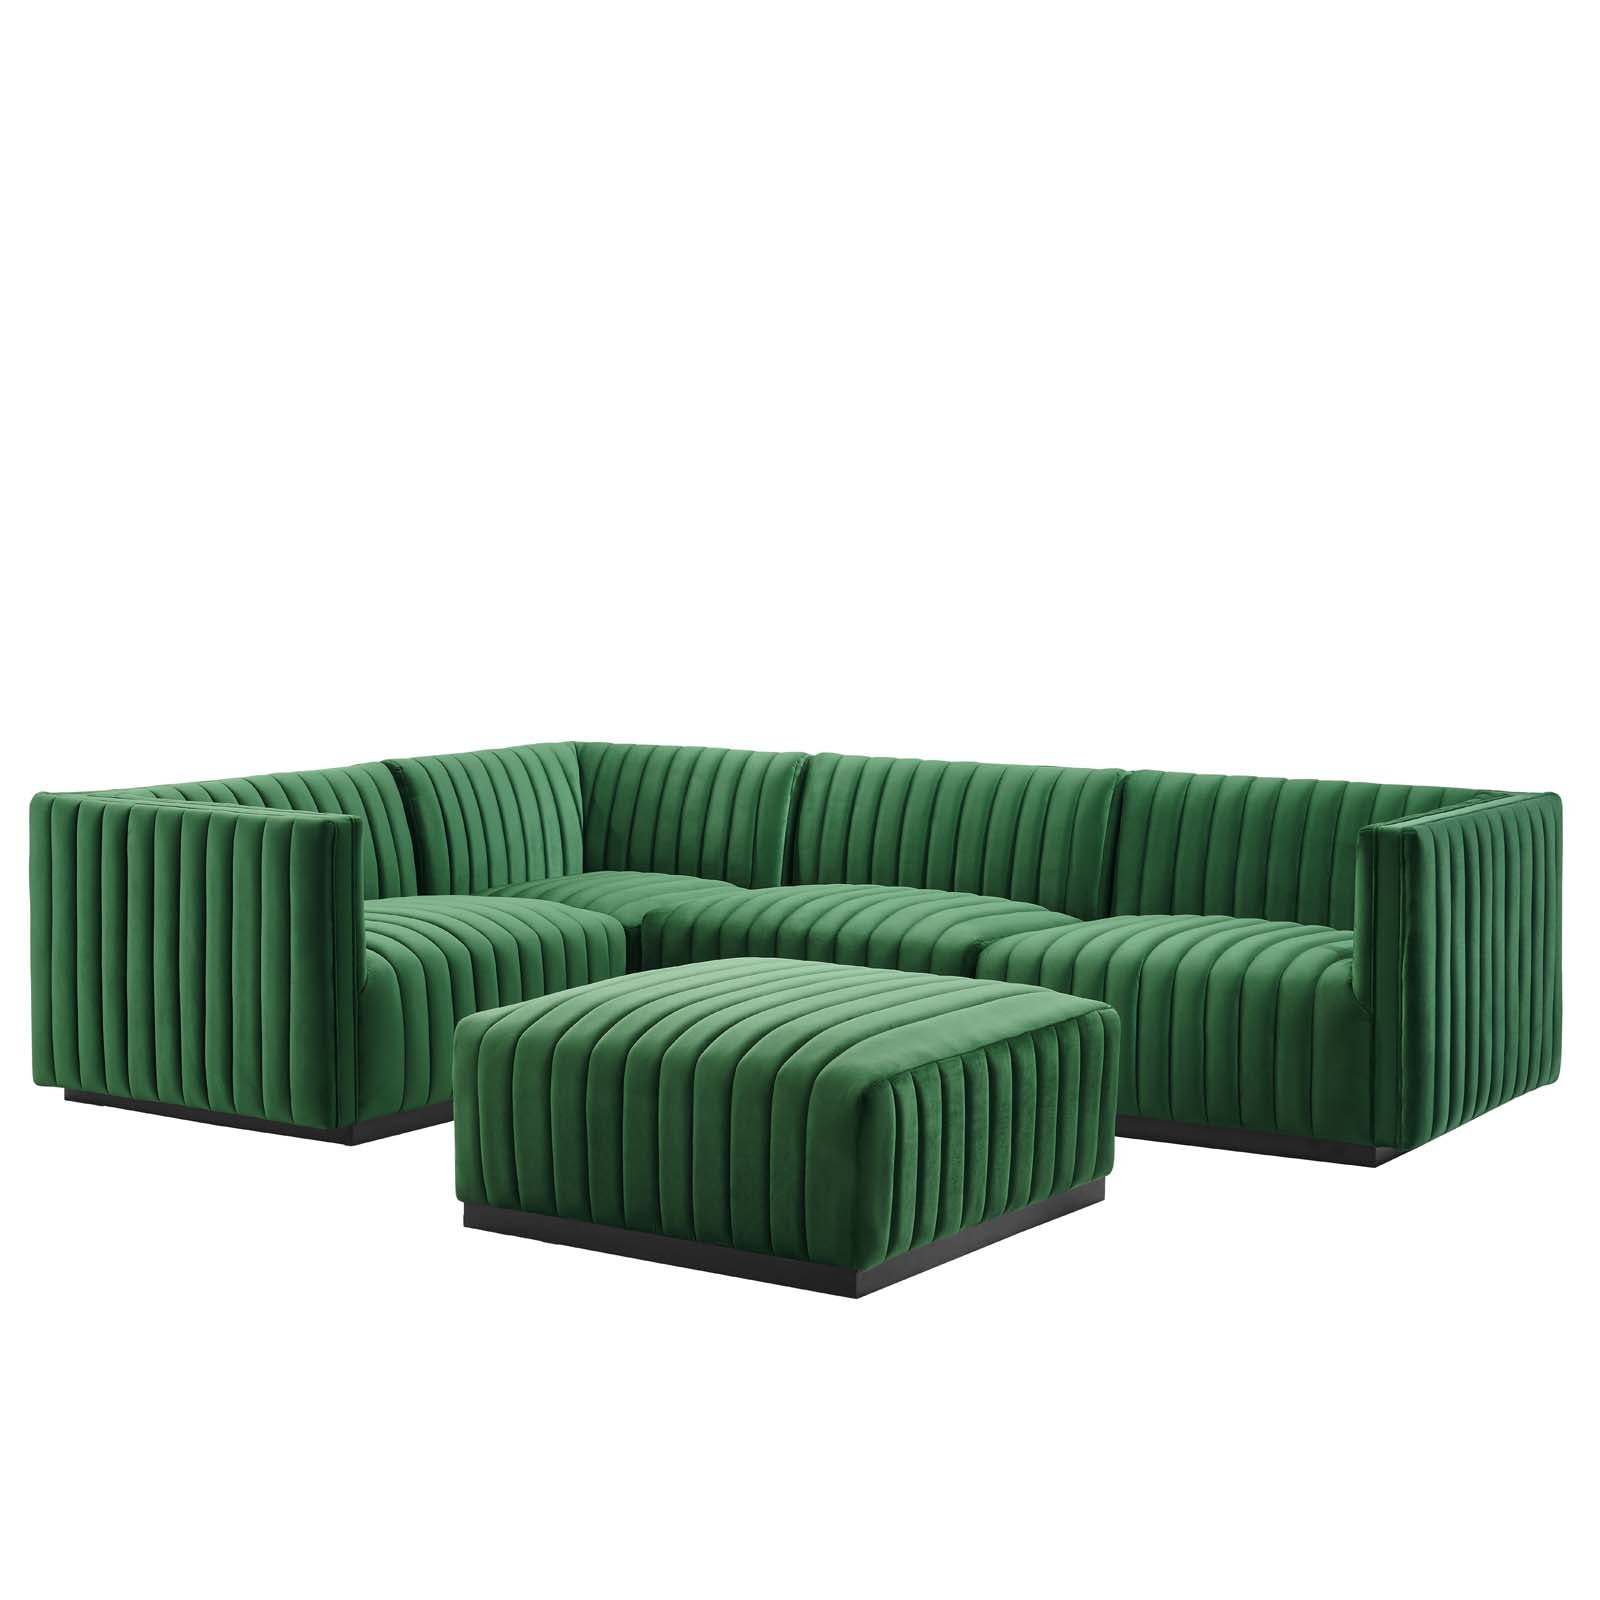 Conjure Channel Tufted Performance Velvet 5-Piece Sectional - East Shore Modern Home Furnishings